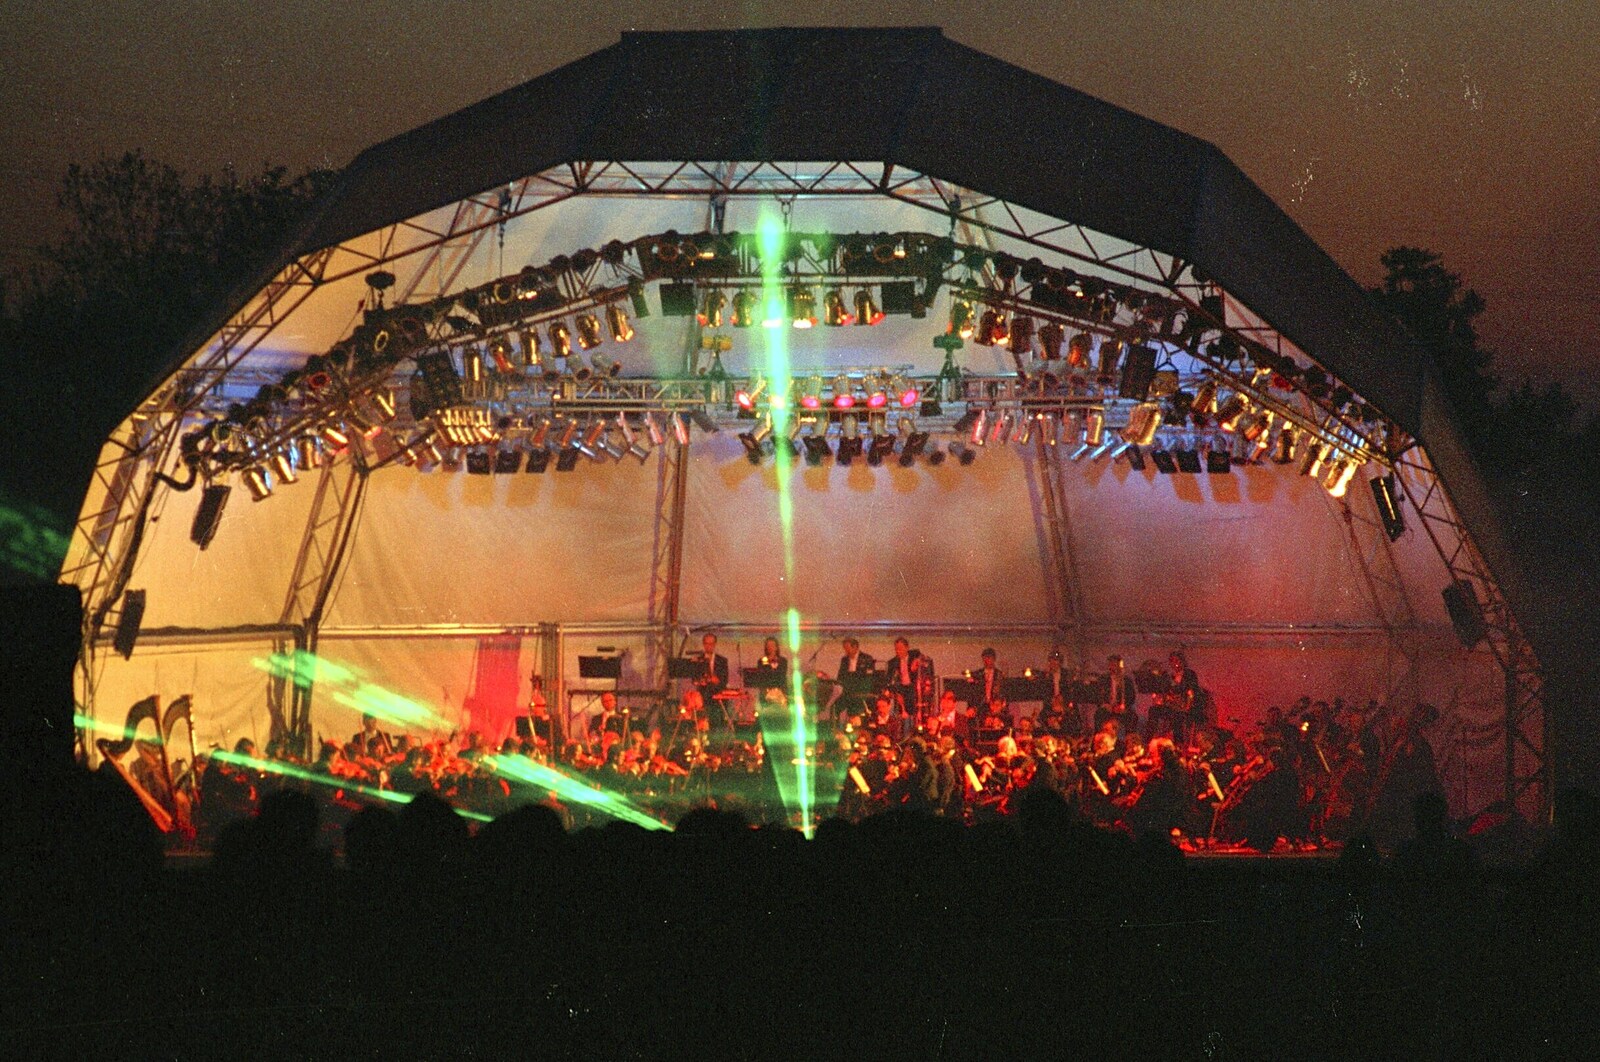 Earlham Classics, Earlham Park, Norwich, Norfolk - 9th May 1992: The lasers are turned on